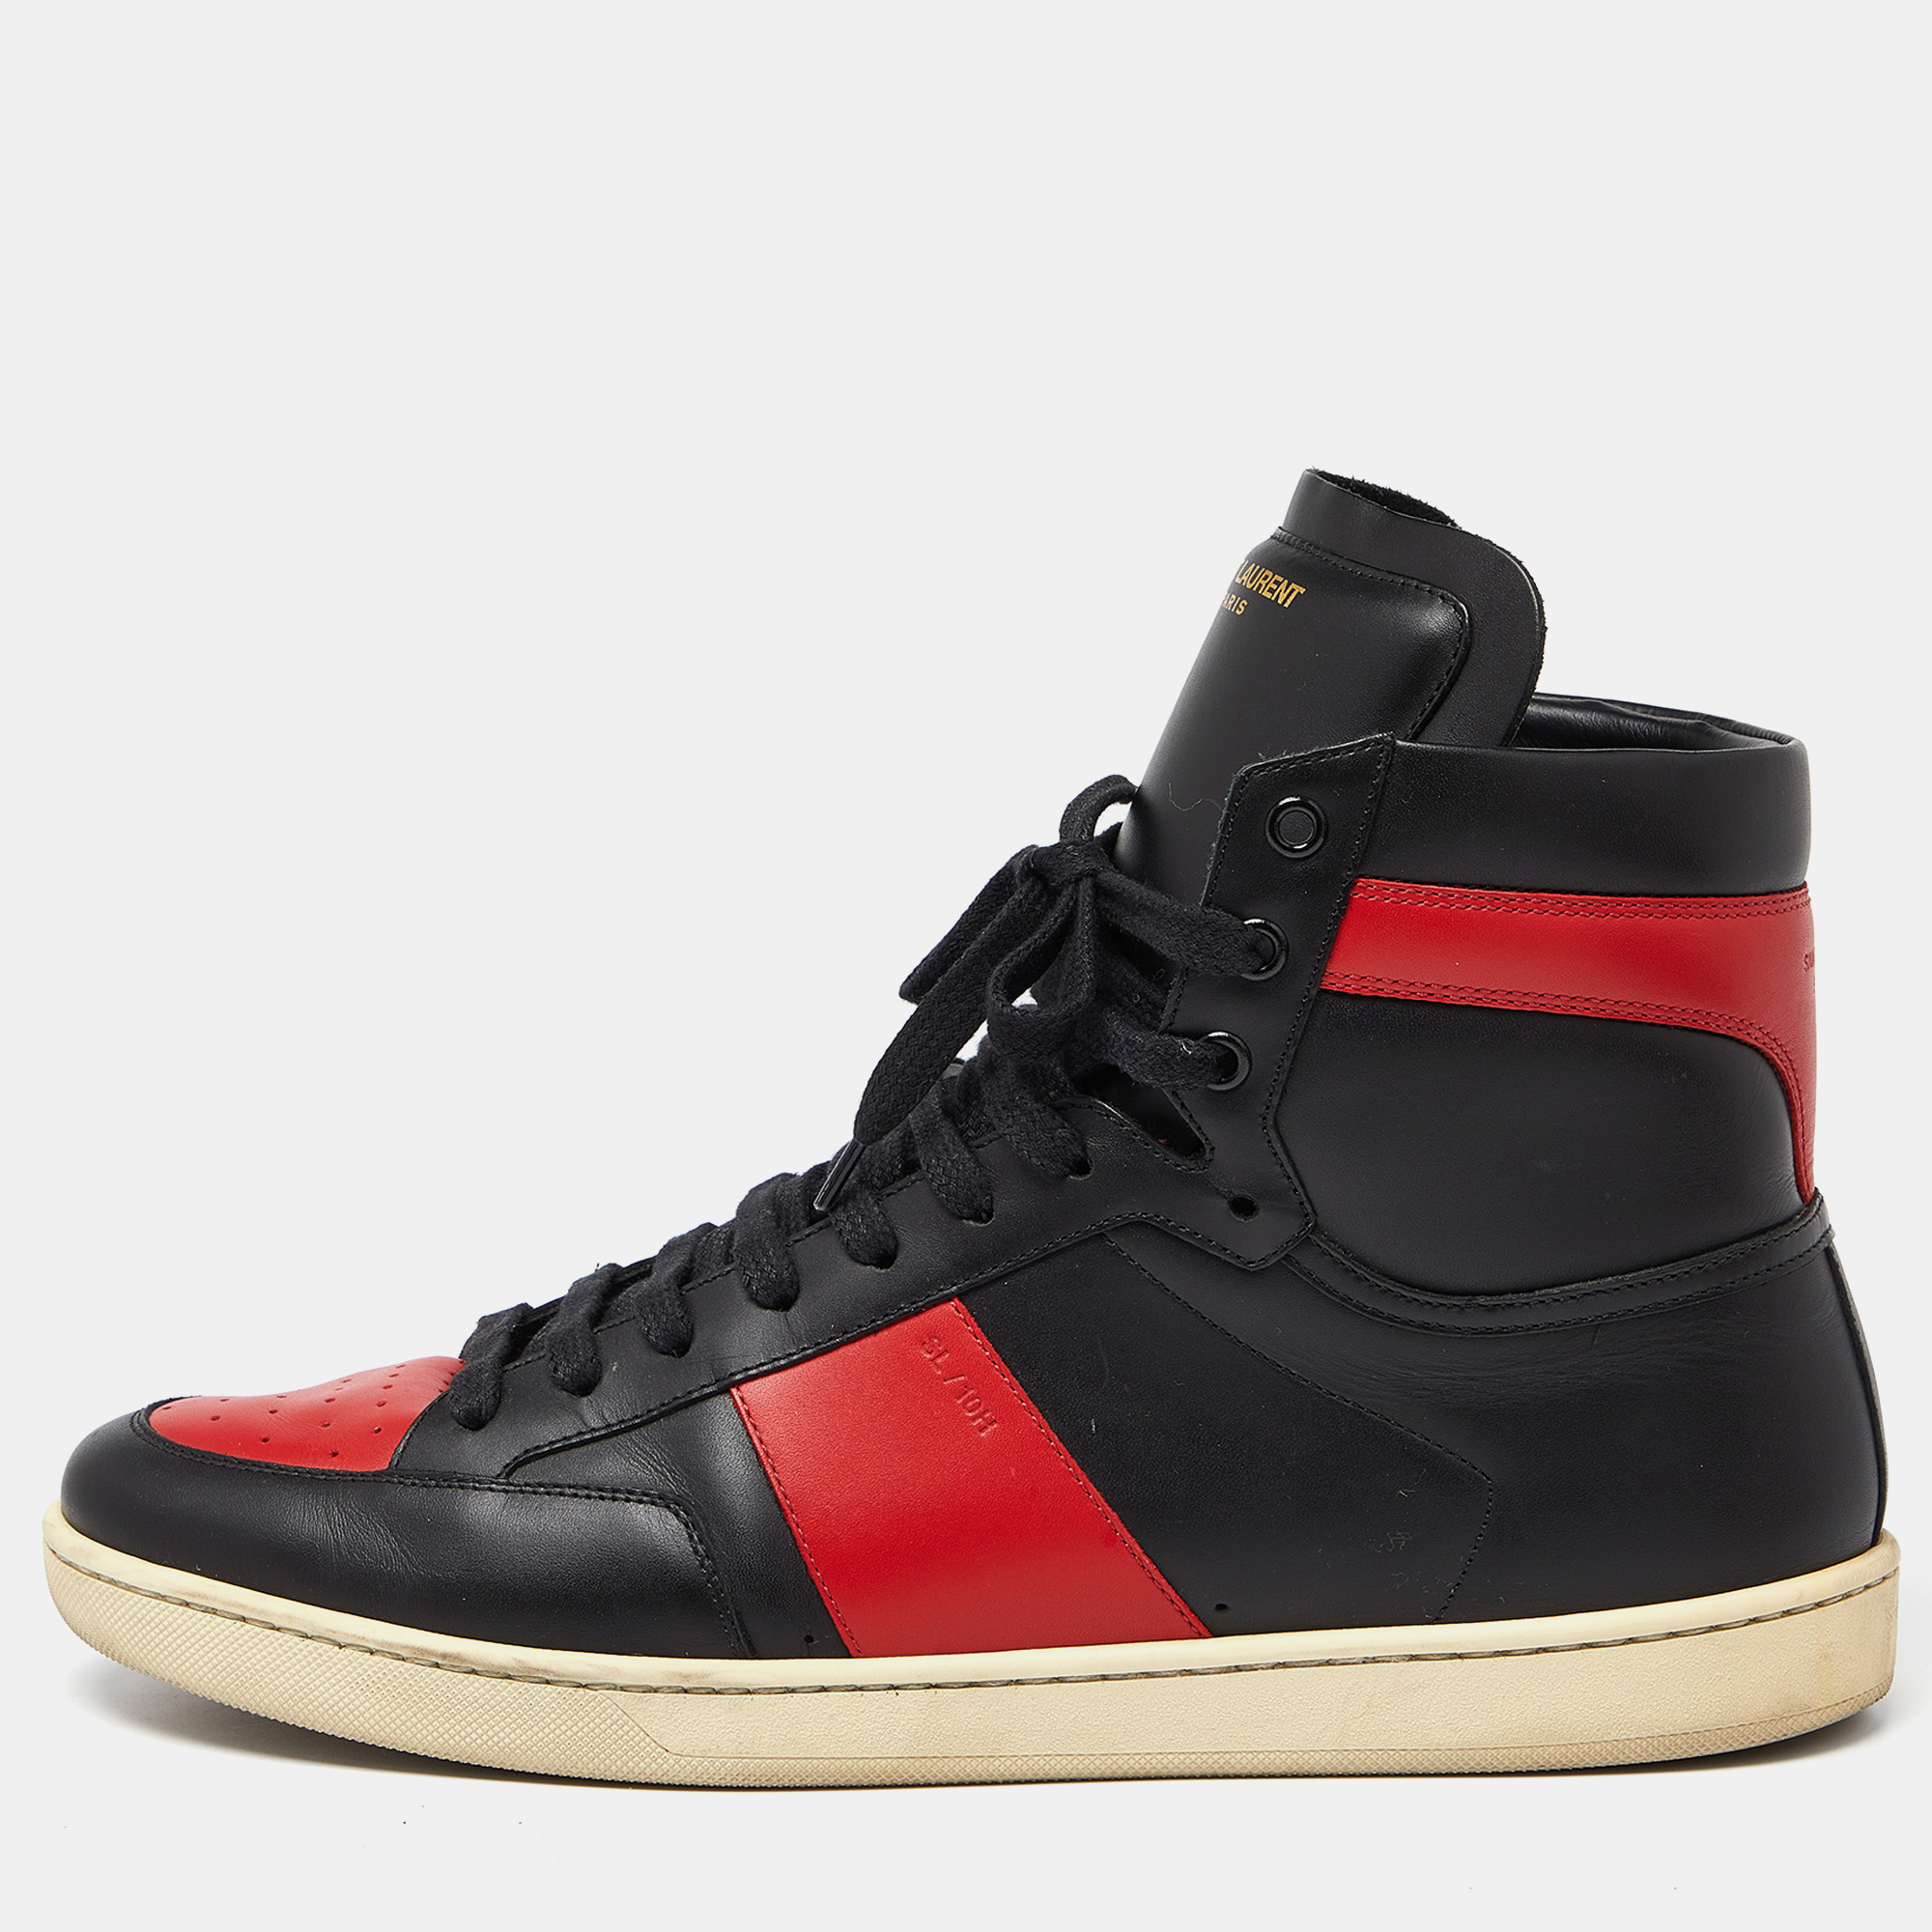 Saint Laurent Black/Red Leather SL-10H High Top Sneakers Size 45